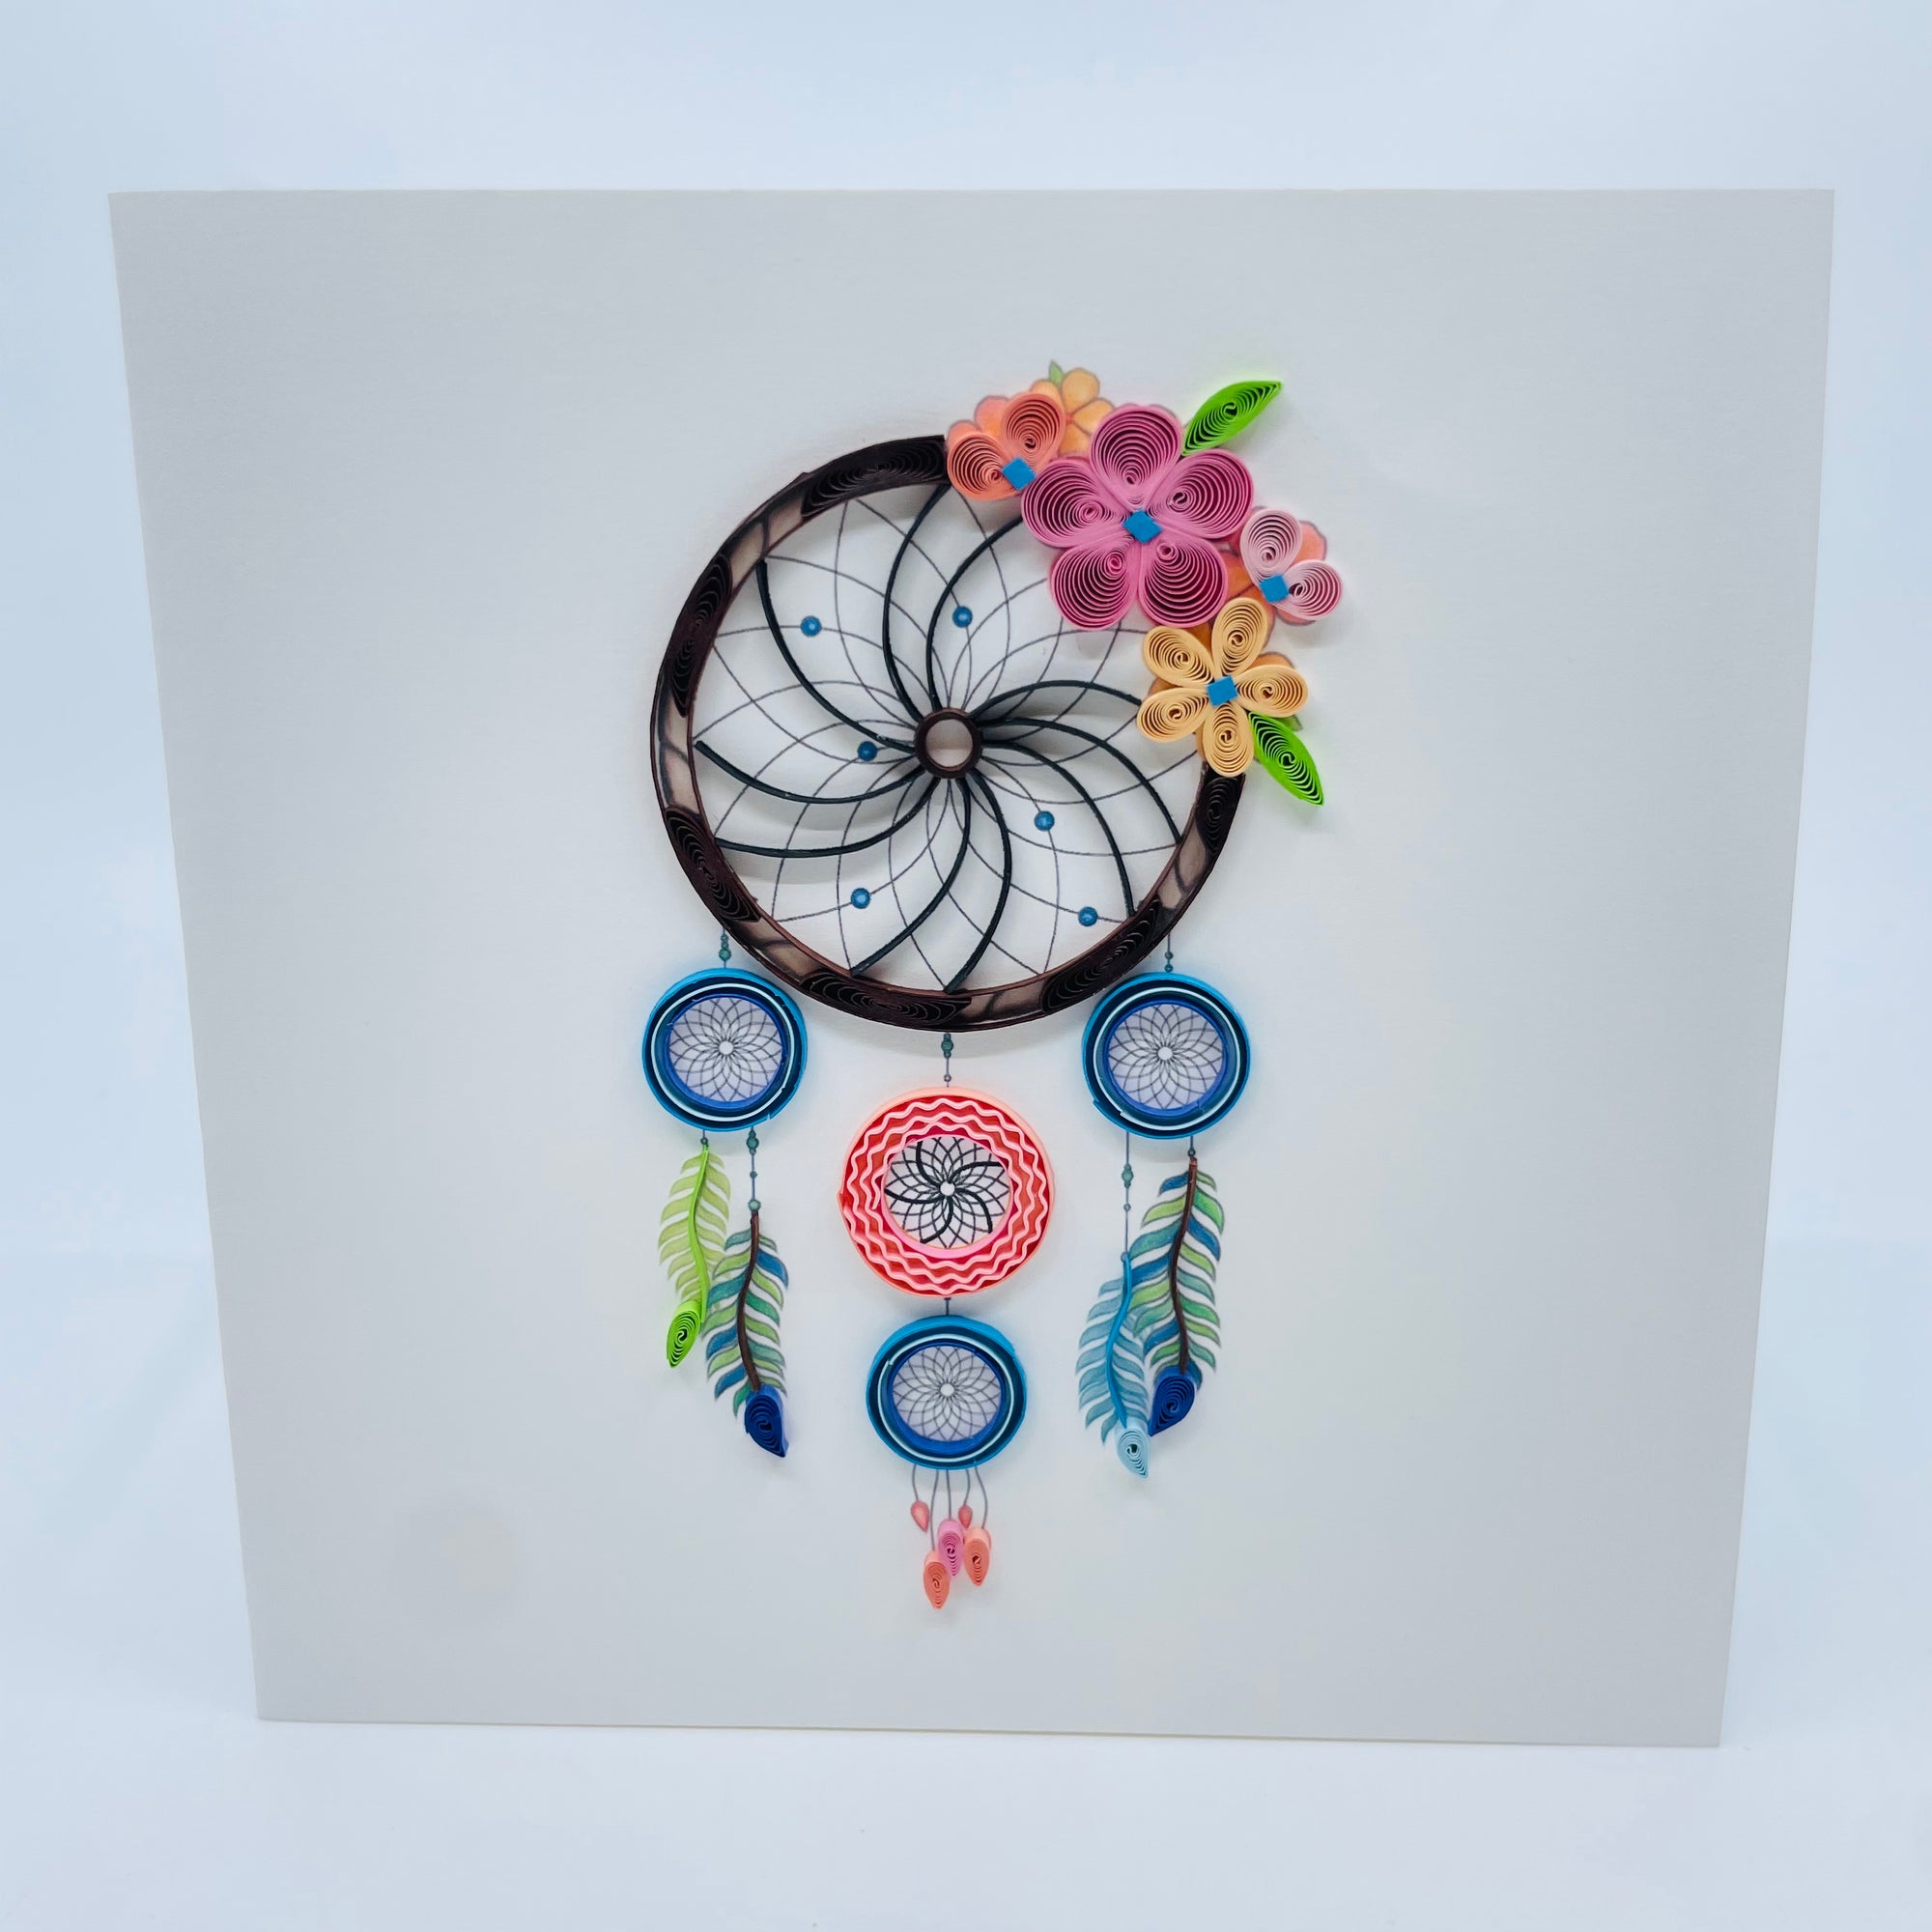 Quilling Art Card Dreamcatcher - Quilling Art Card Dreamcatcher -  - House of Himwitsa Native Art Gallery and Gifts